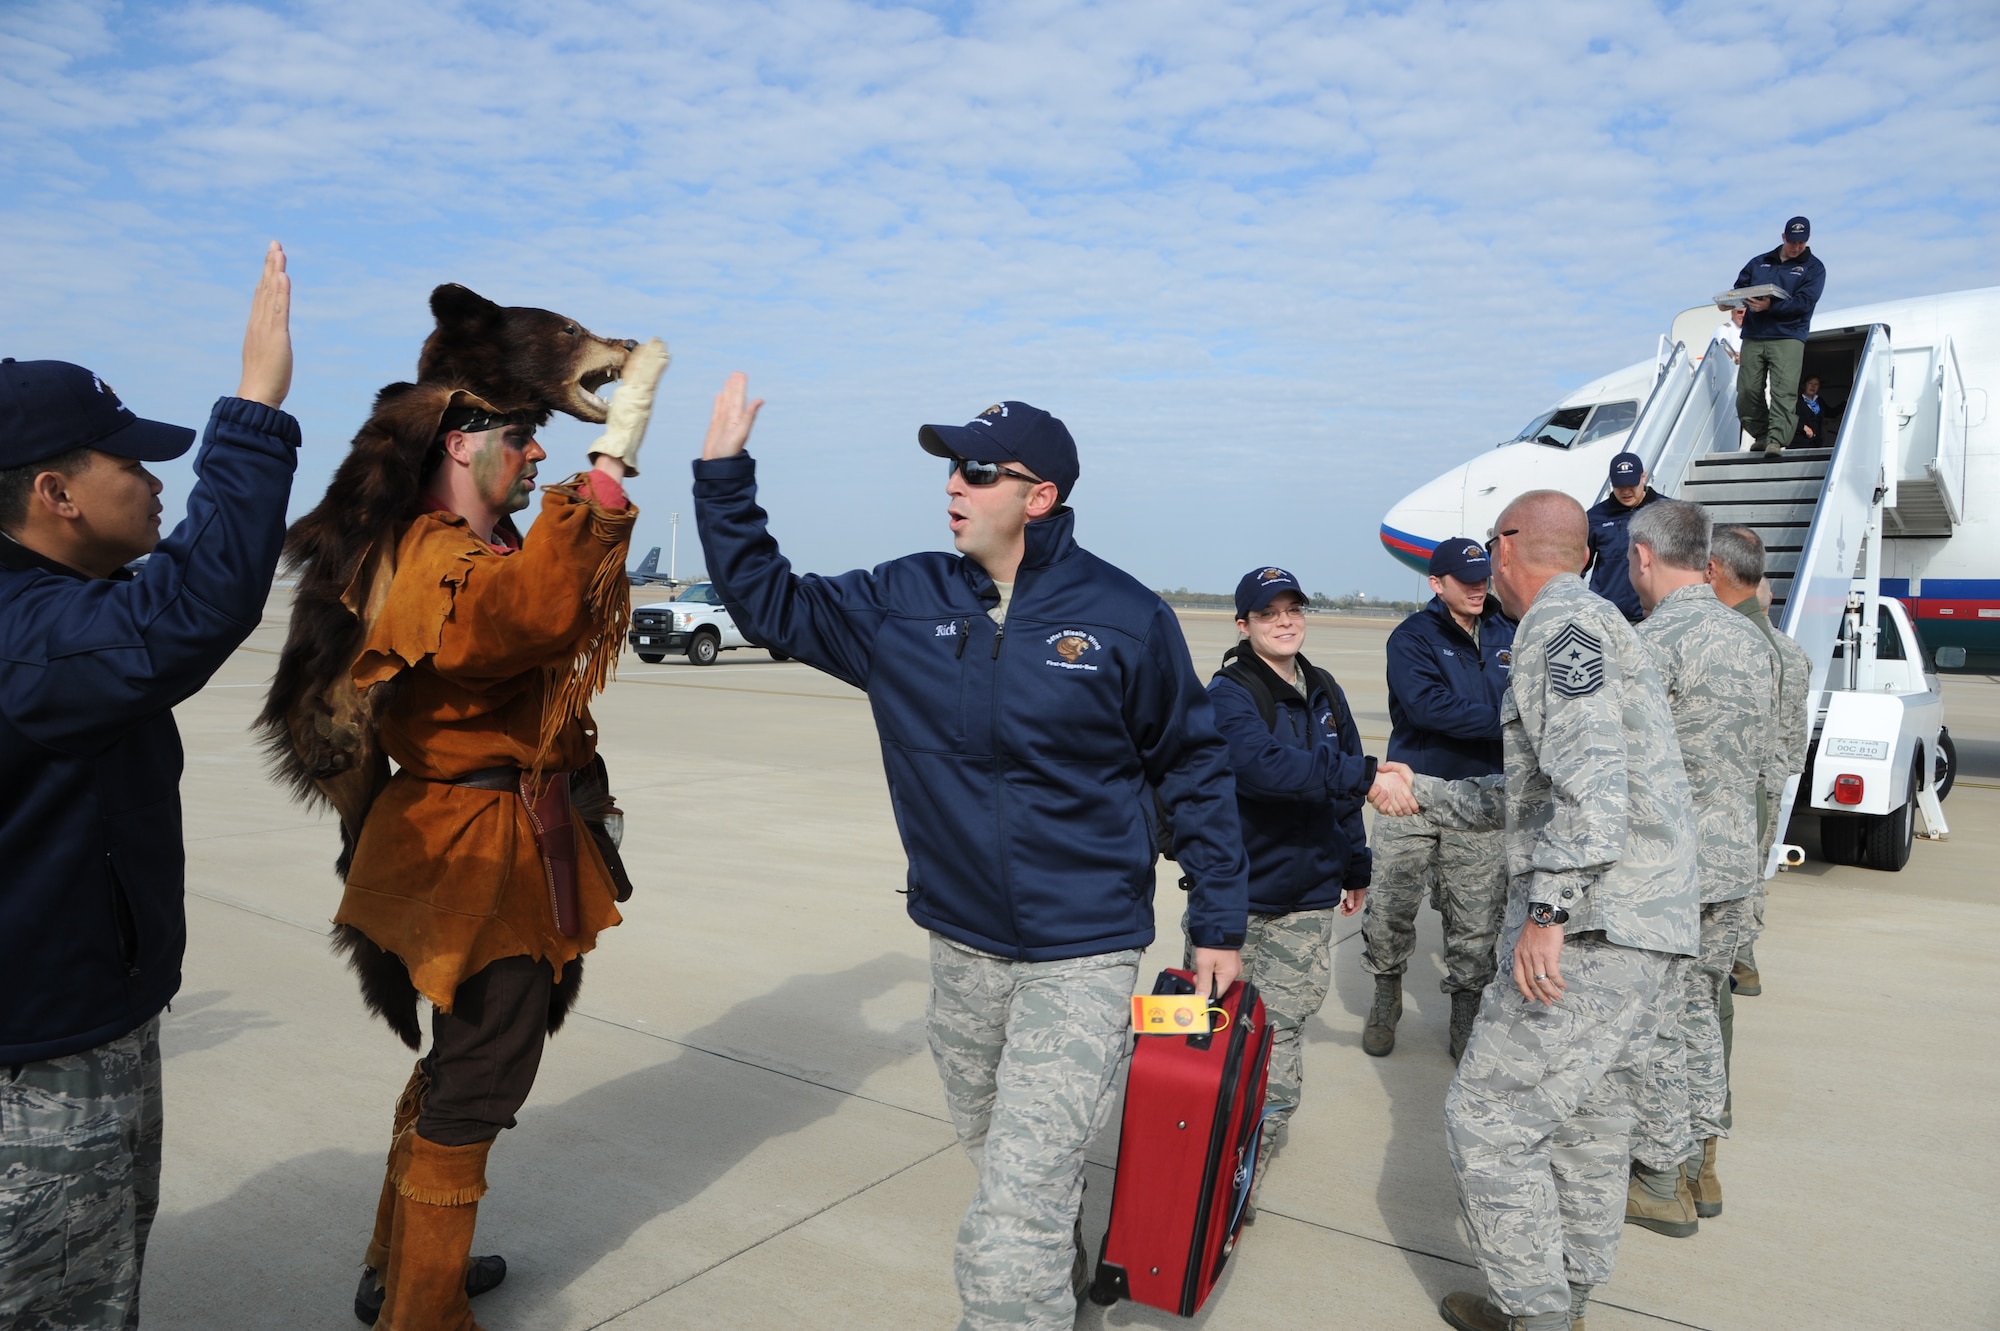 BARKSDALE AIR FORCE BASE, La. -- SSgt Zachary Younger, dressed as the 341st Missile Wing mascot "Roadkill," greets his teammates as they arrive Nov. 6 for the second-annual Global Strike Challenge symposium and scoreposting events this week.  The competition is designed to build a culture of excellence and esprit de corps to motivate bomber, missile and security forces Airmen to new levels of performance and achievement. (U.S. Air Force photo by Master Sgt. Corey A. Clements)